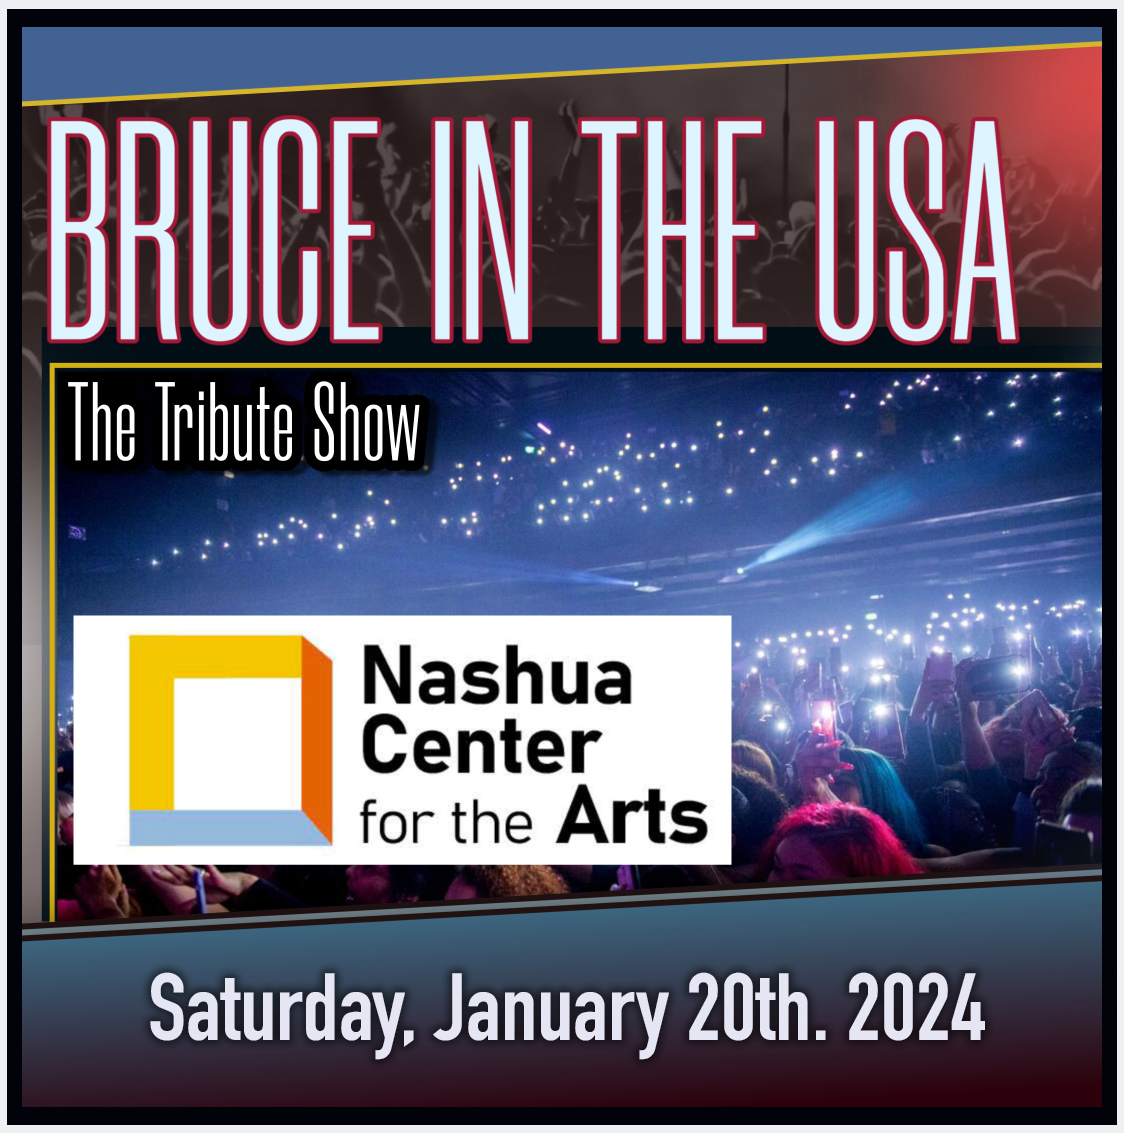 BRUCE IN THE USA - The Bruce Springsteen Tribute Show will be performing at NASHUA CENTER FOR THE ARTS, Nashua, New Hampshire Saturday - January 20th., 2024. Find out more... nashuacenterforthearts.com